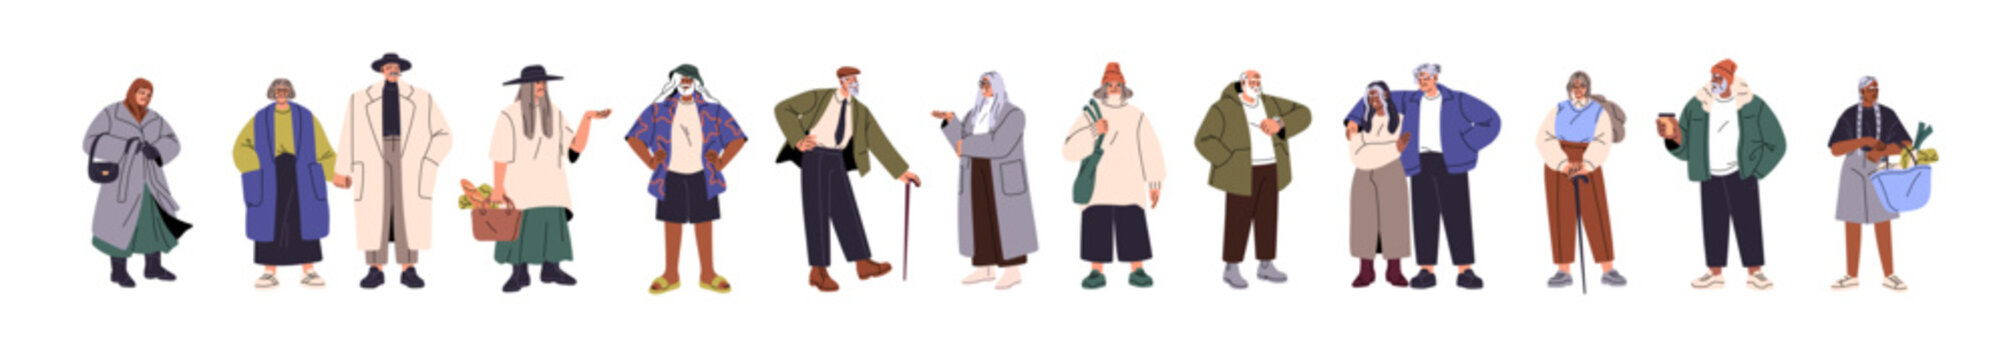 Modern old people set. Different fashion senior in stylish outfits standing. Happy aged ladies in trendy looks. Fashionable gray pensioners. Flat isolated vector illustration on white background